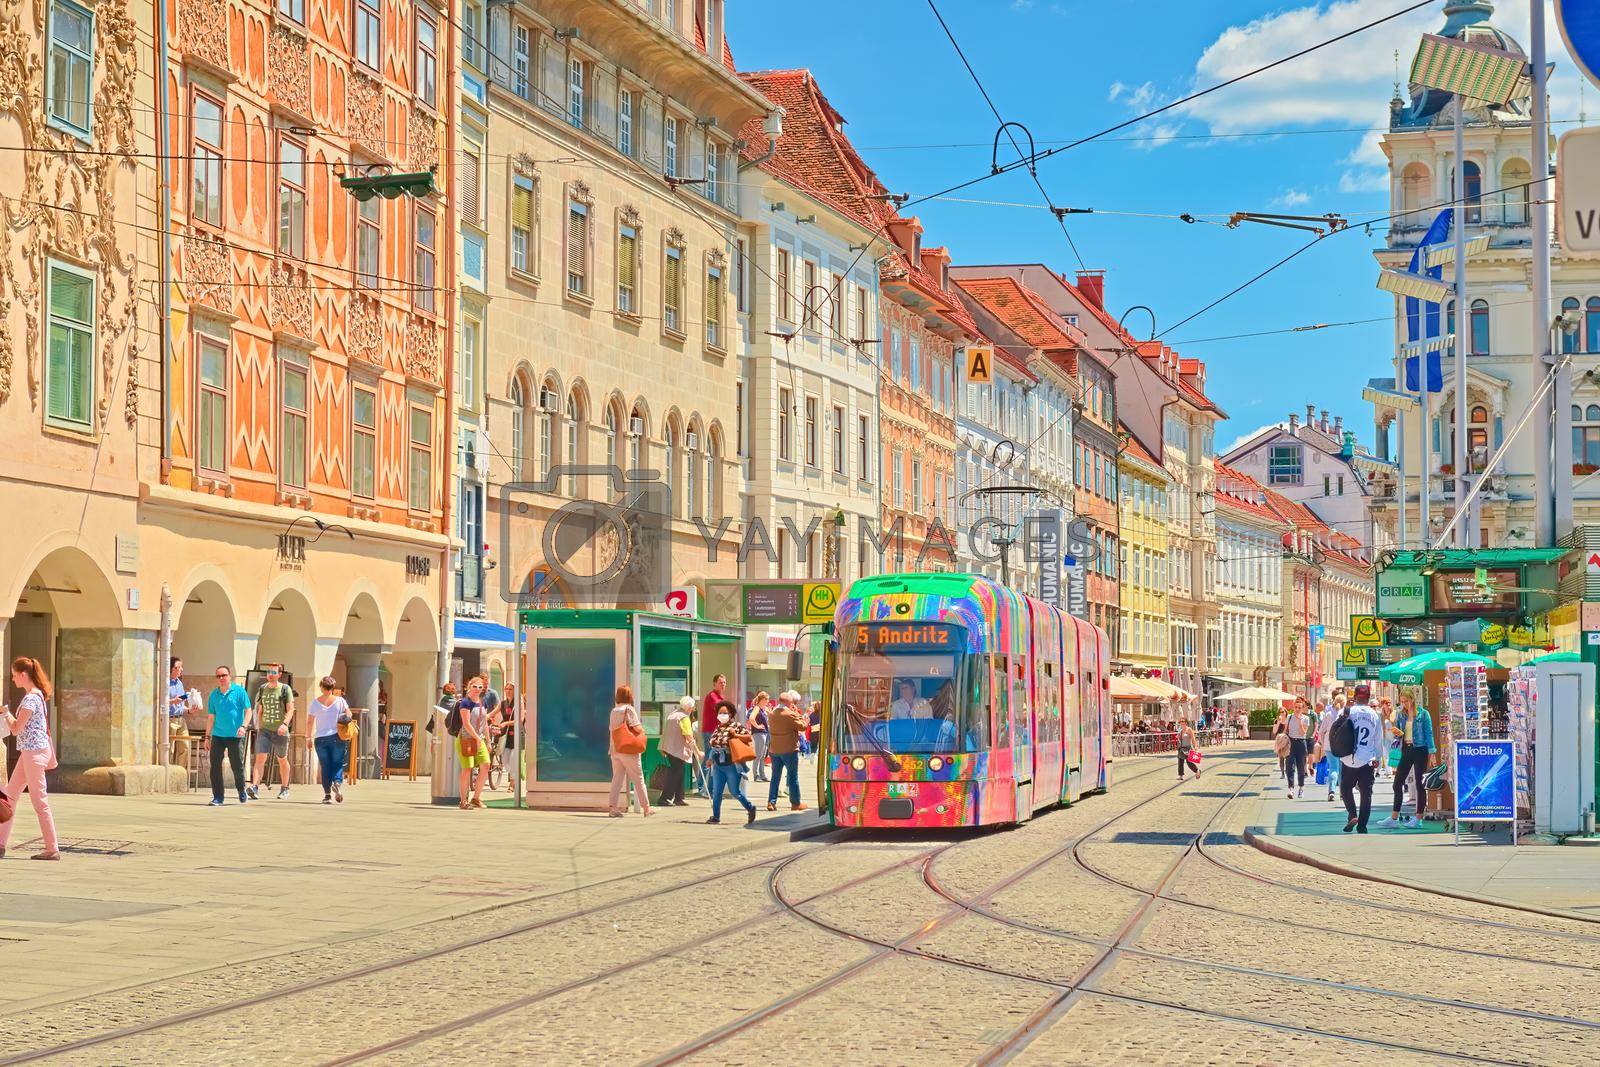 Royalty free image of Graz - June 2020, Austria: View of the city center of Graz with modern tram, tram lines, tram station and beautiful old buildings in the traditional architectural style by travellaggio